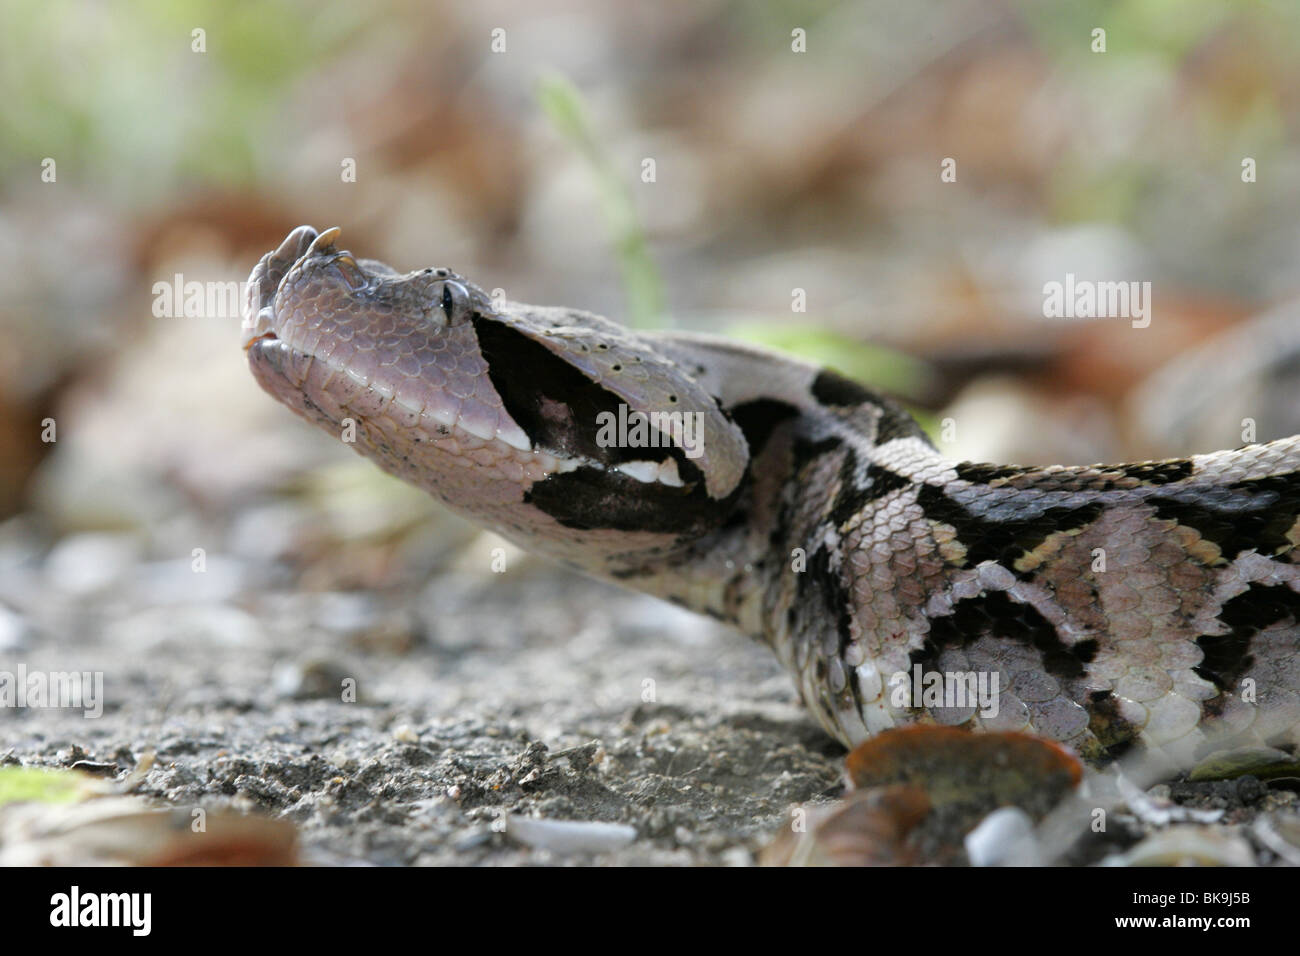 Gaboon Viper, South Africa, reptile, snake Stock Photo